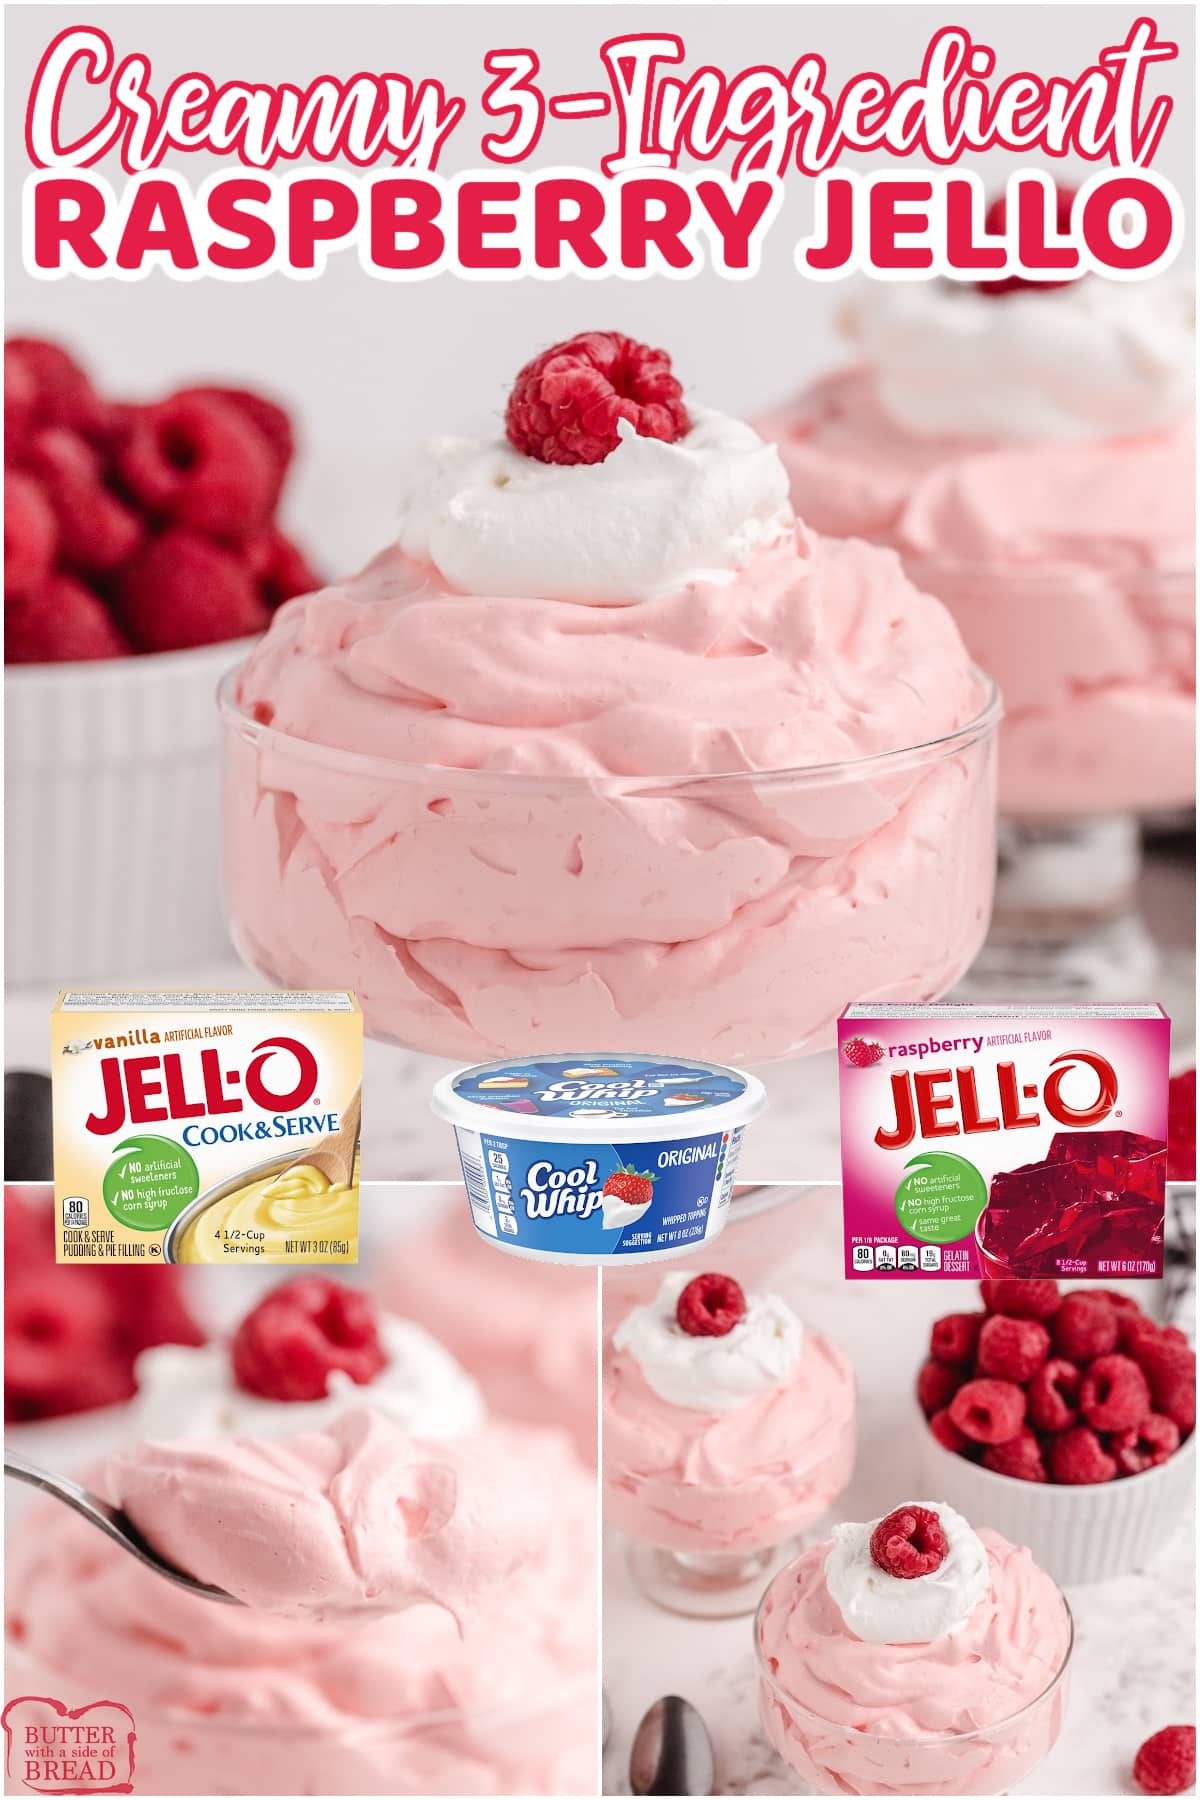 Creamy Raspberry Jello made with just 3 ingredients! Easy Jello recipe made with jello, vanilla pudding and whipped topping for a simple and delicious dessert.